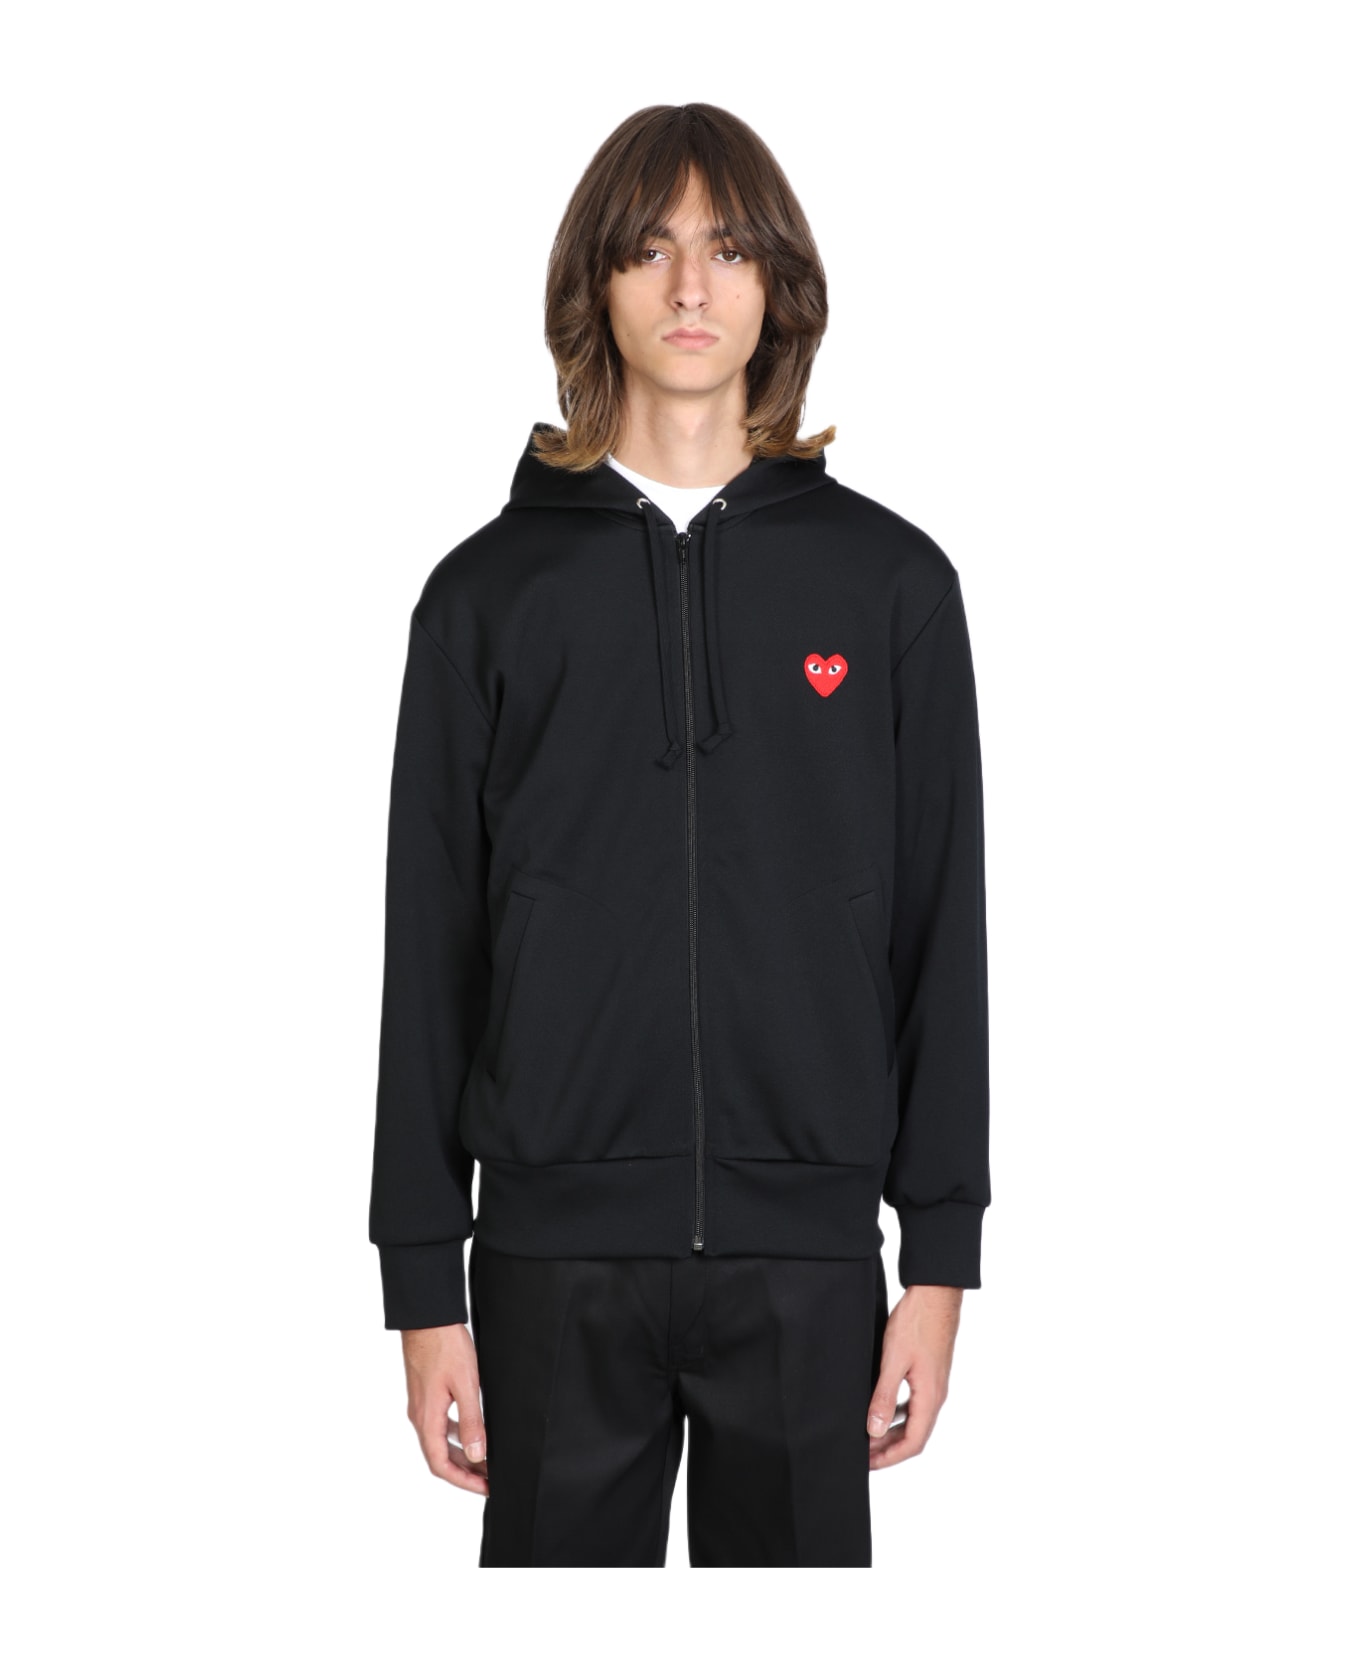 Comme des Garçons Play Mens Sweatshirt Knit Black Zip-up Hoodie With Red Heart Patch. - Black